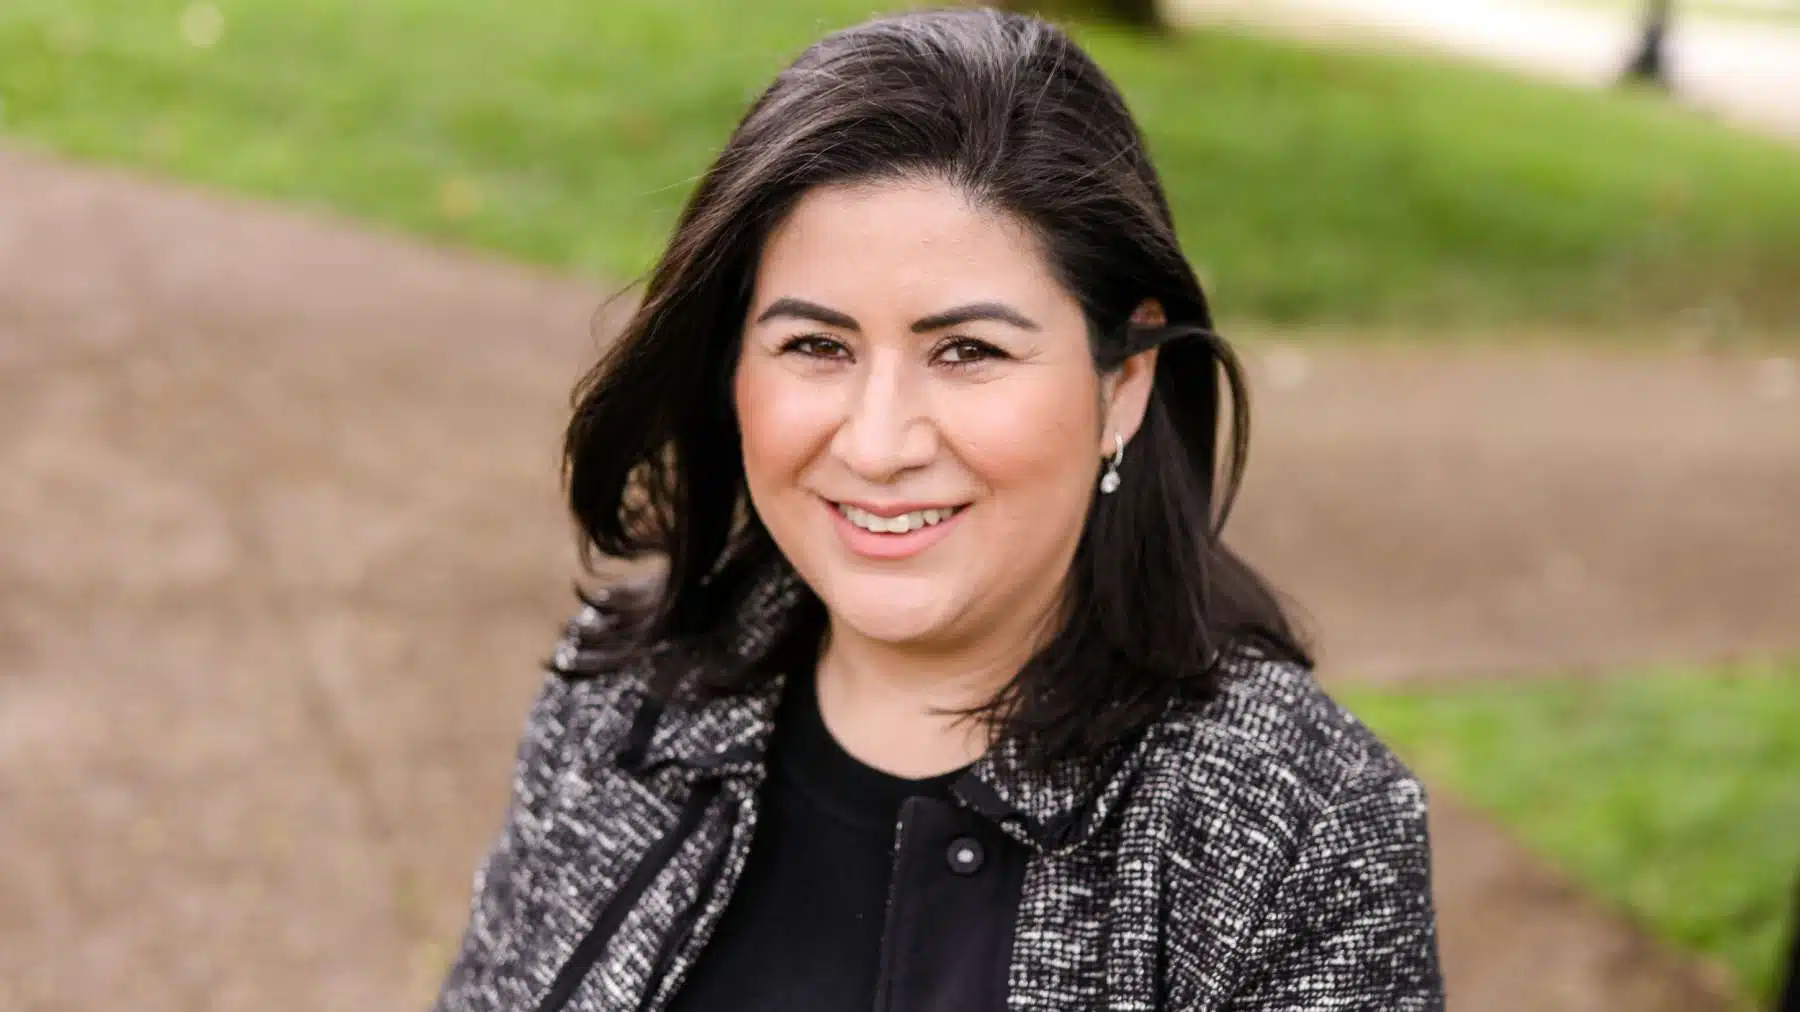 Tiana Ochoa is running a write-in campaign for House District 13 and needs your help